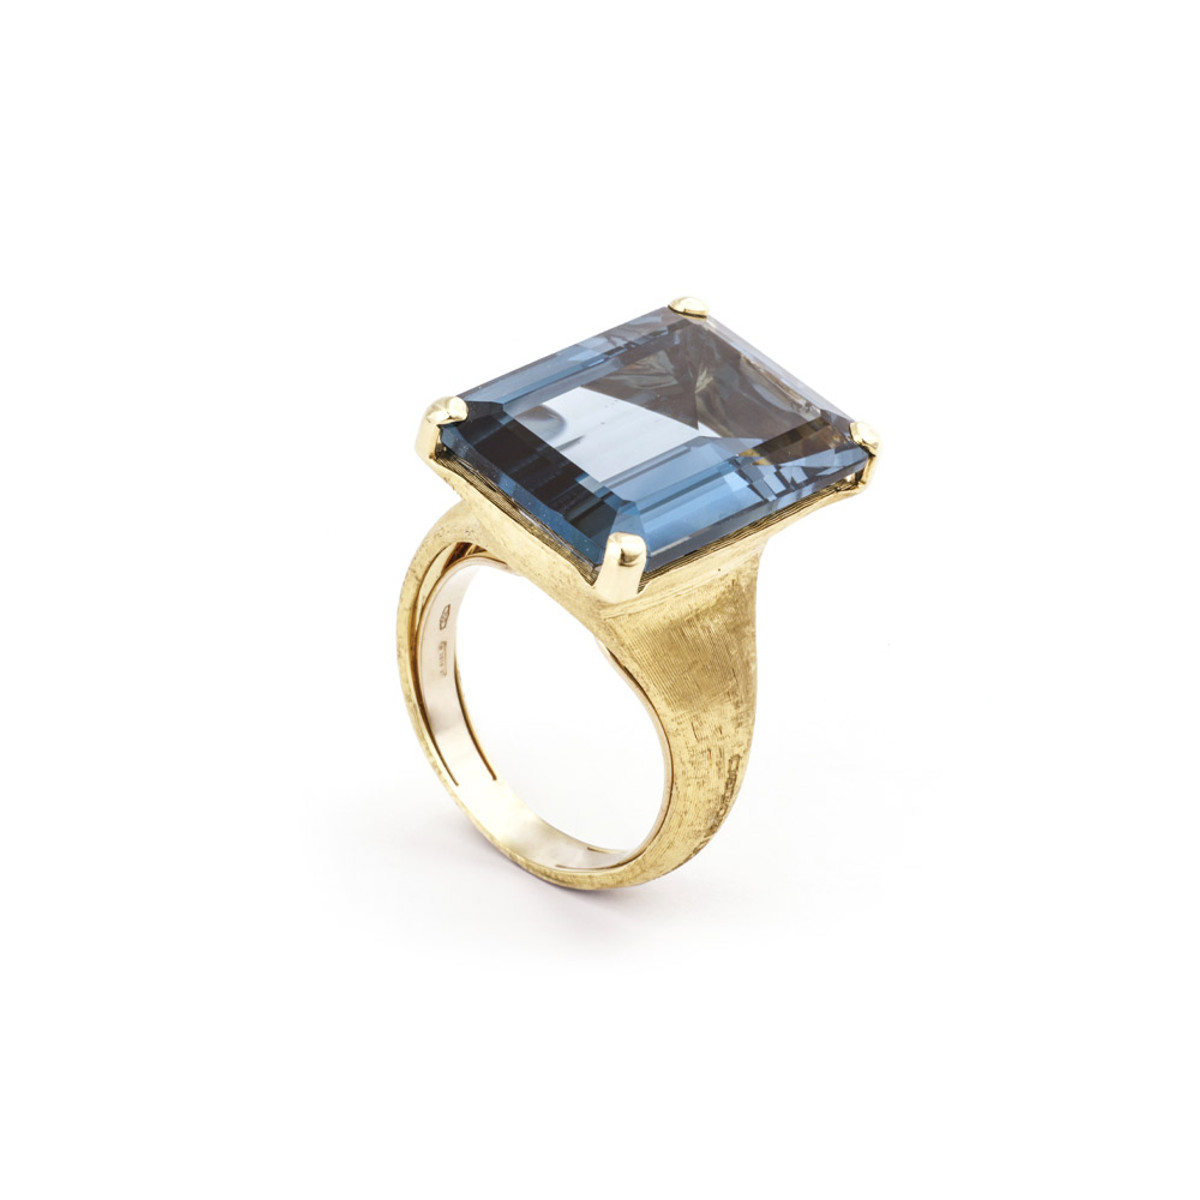 Marco Bicego Alta Collection 18K Yellow Gold London Blue Topaz Ring-54242 Product Image